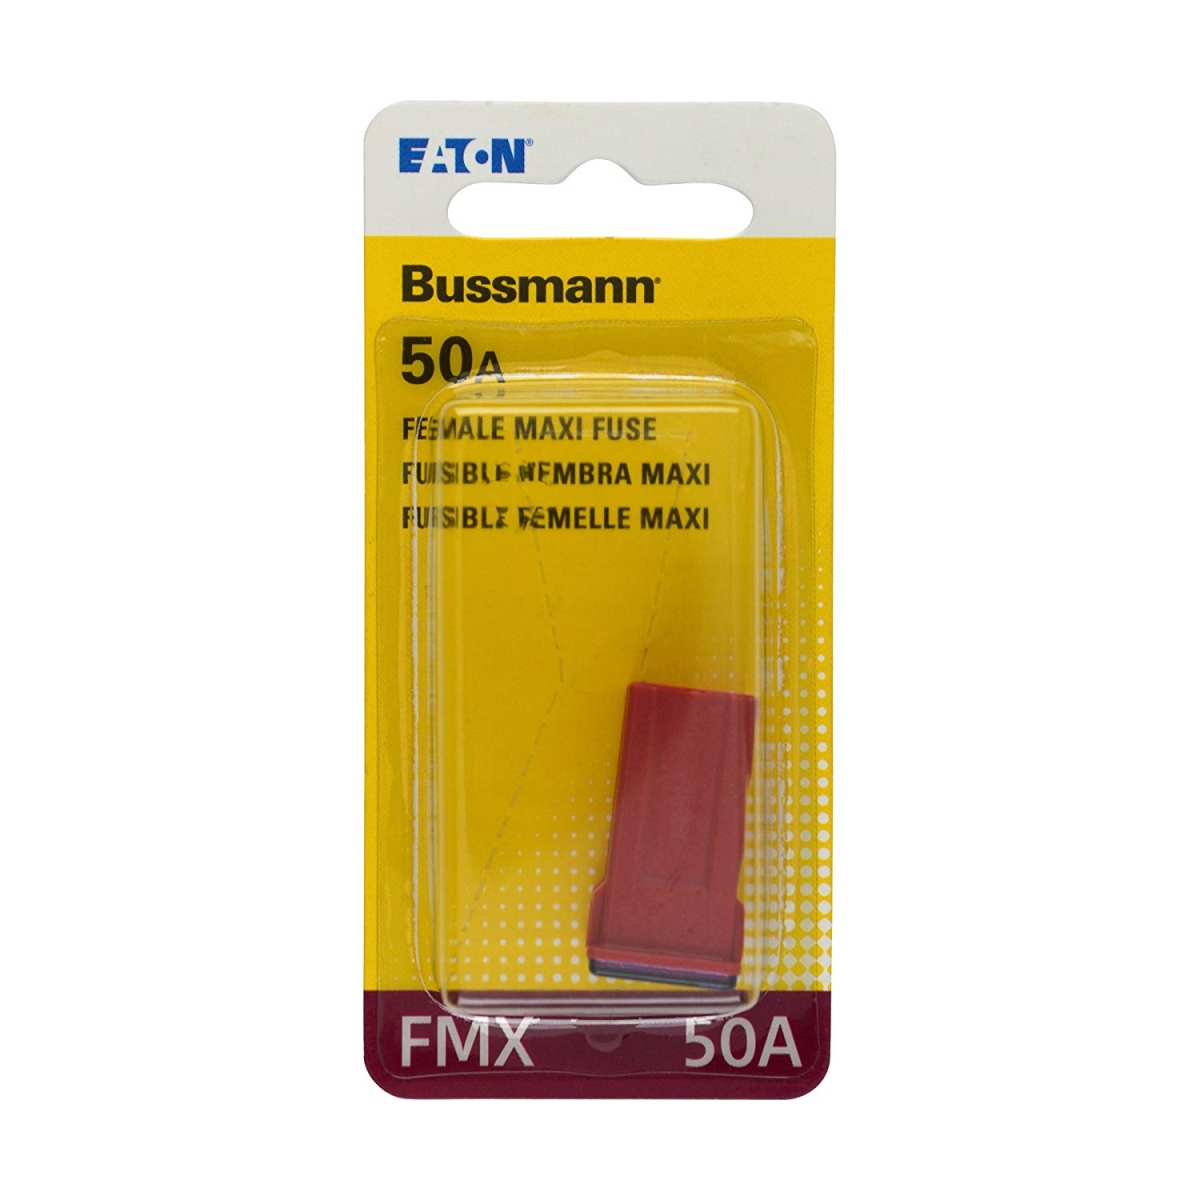 Picture of Bussmann Division 0408.1311 FMX-50 Female Maxi Fuse - Red